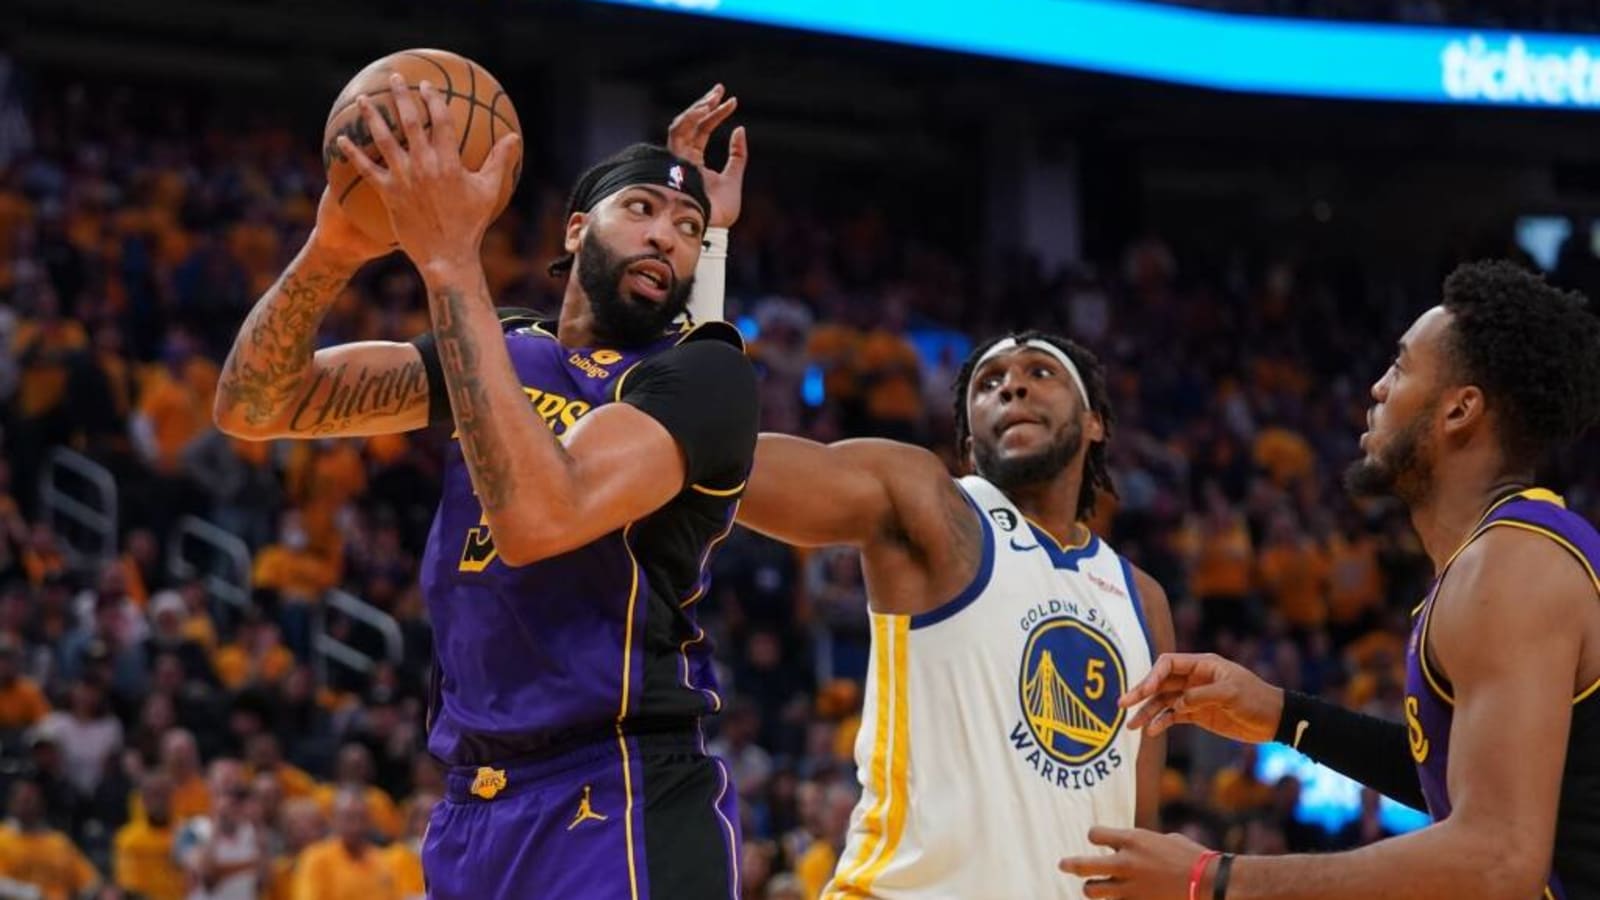 Watch Los Angeles Lakers vs. Golden State Warriors in Game 3 NBA